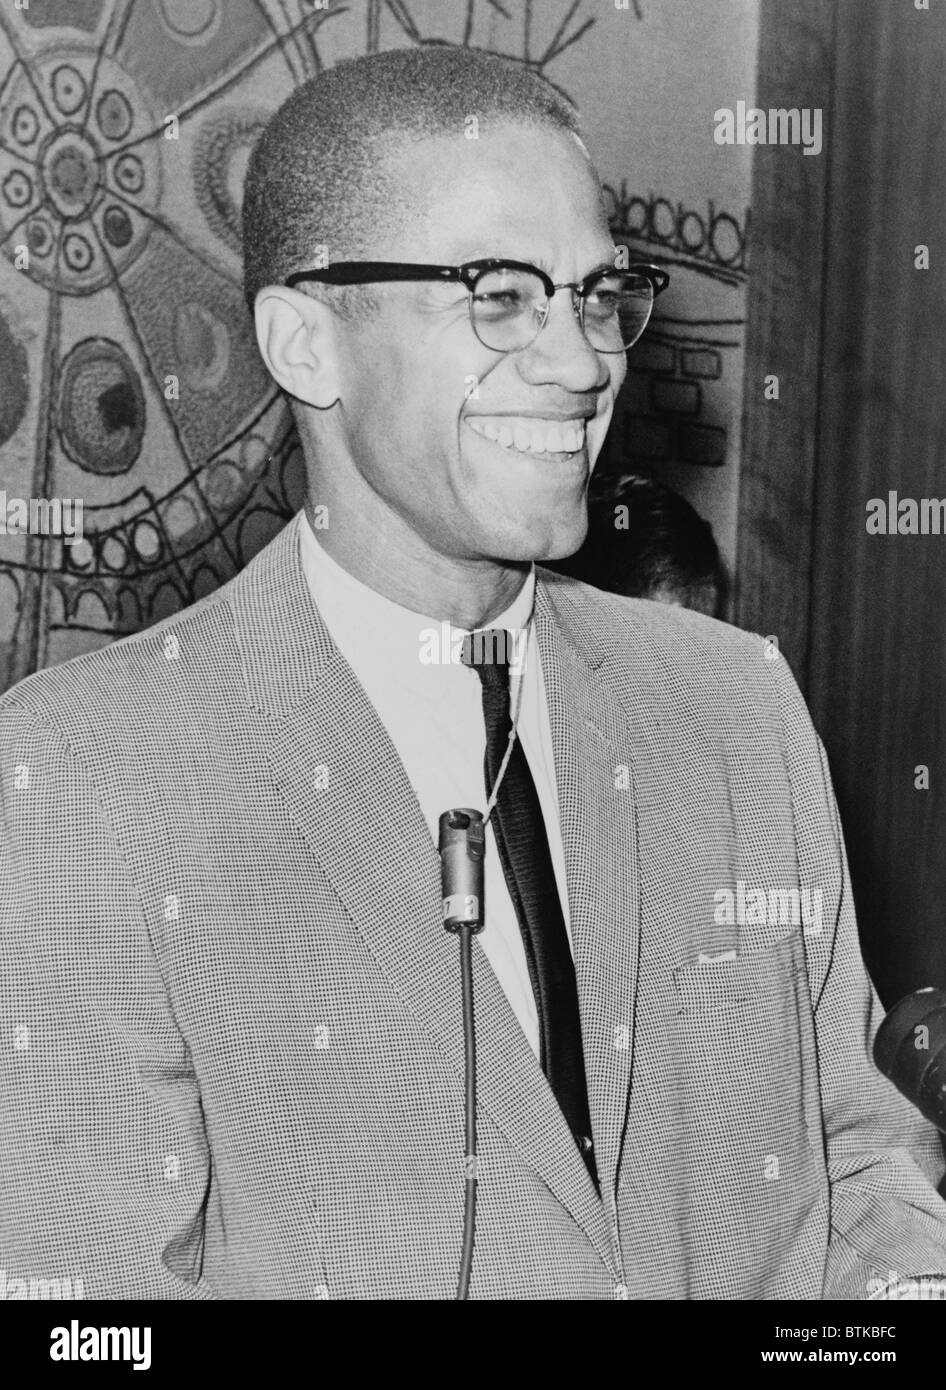 Nation of islam 1960s hi-res stock photography and images - Alamy